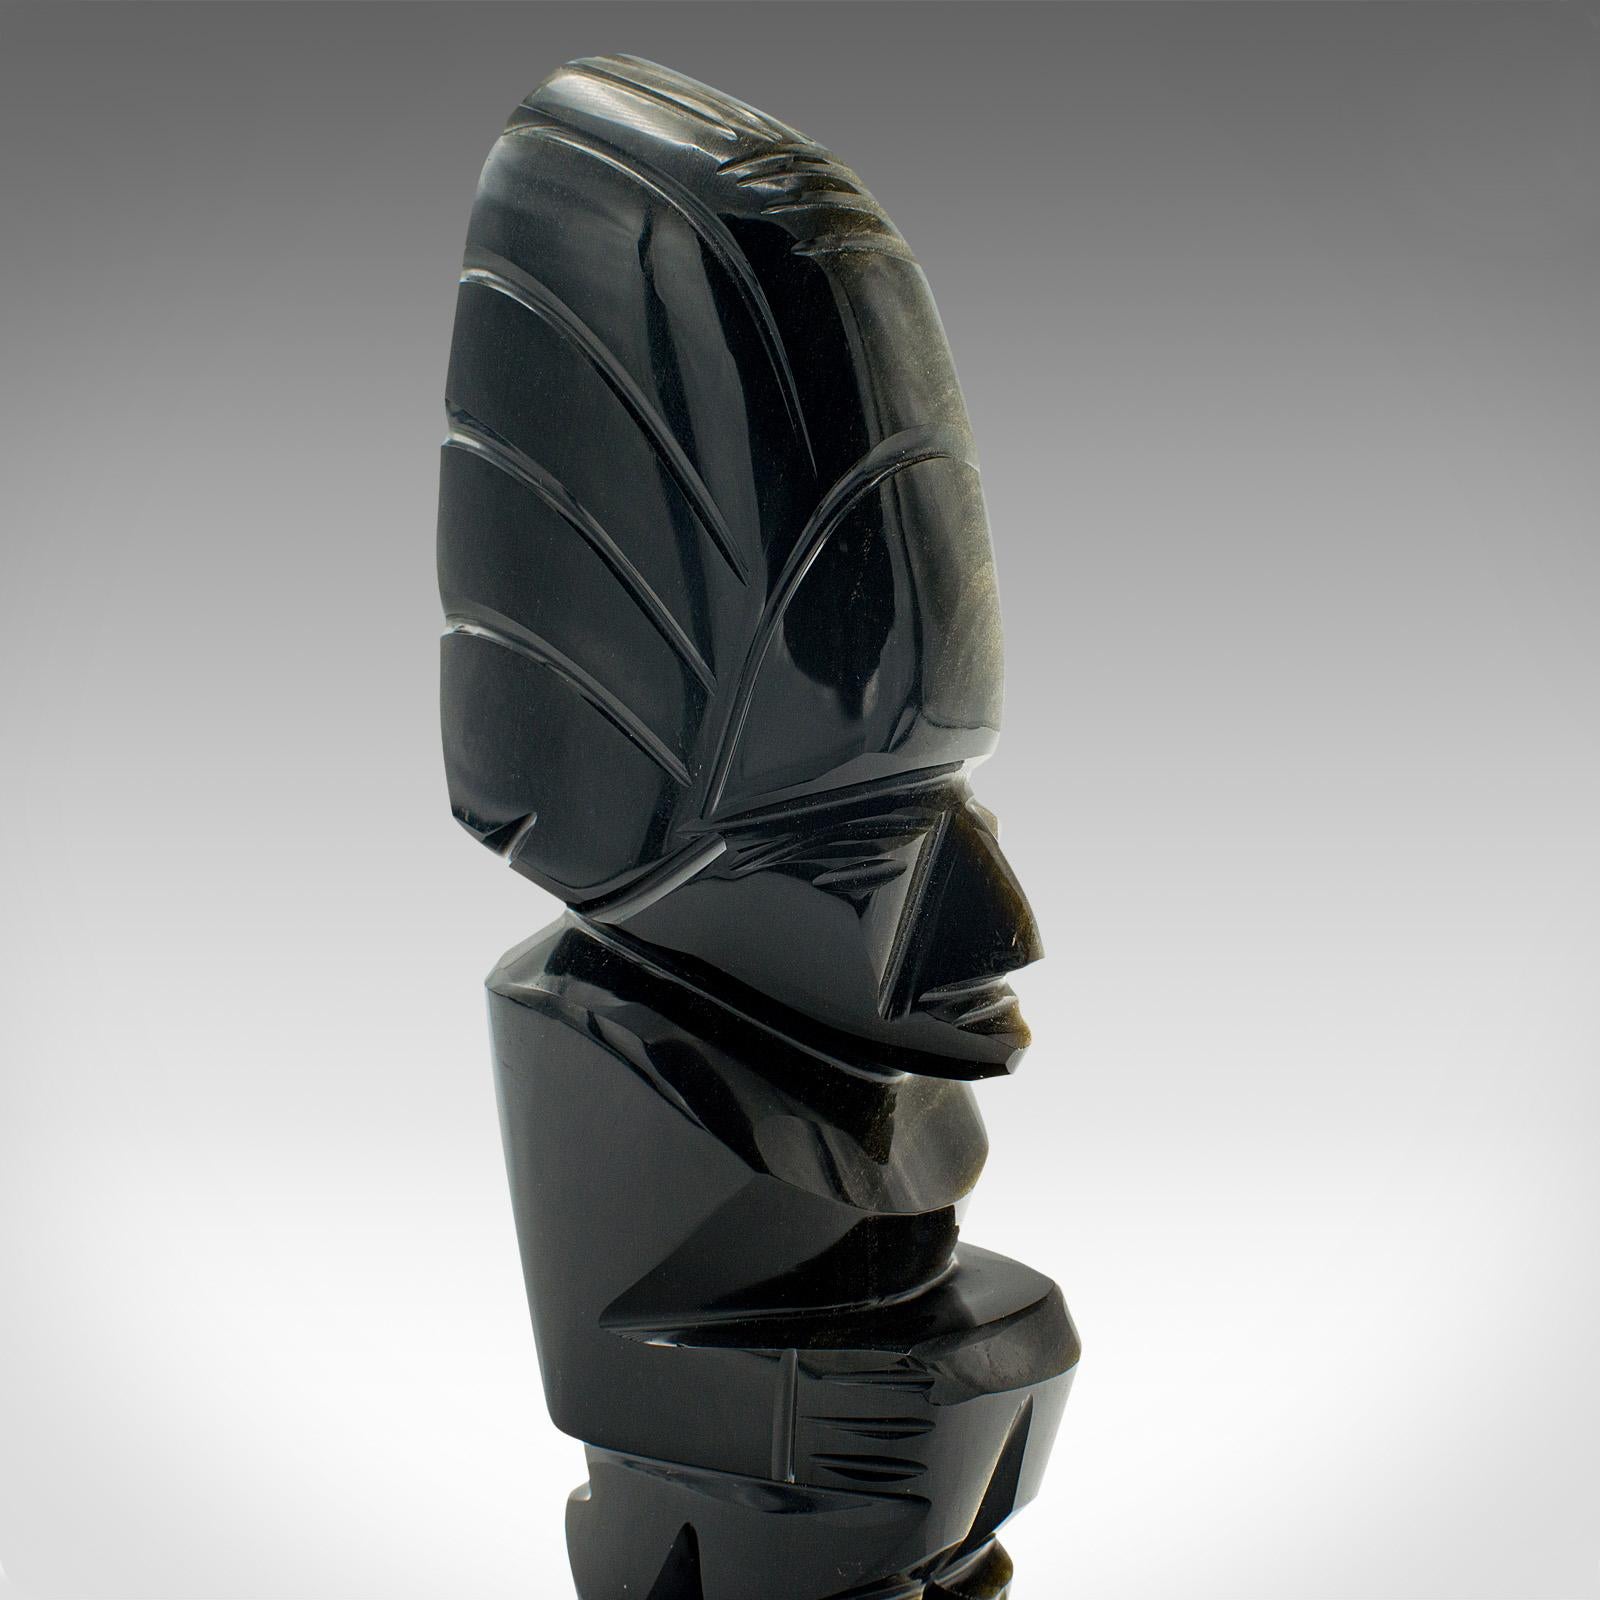 20th Century Small Vintage Aztec Idol Figure, South American, Obsidian, Mayan Sculpture, 1950 For Sale